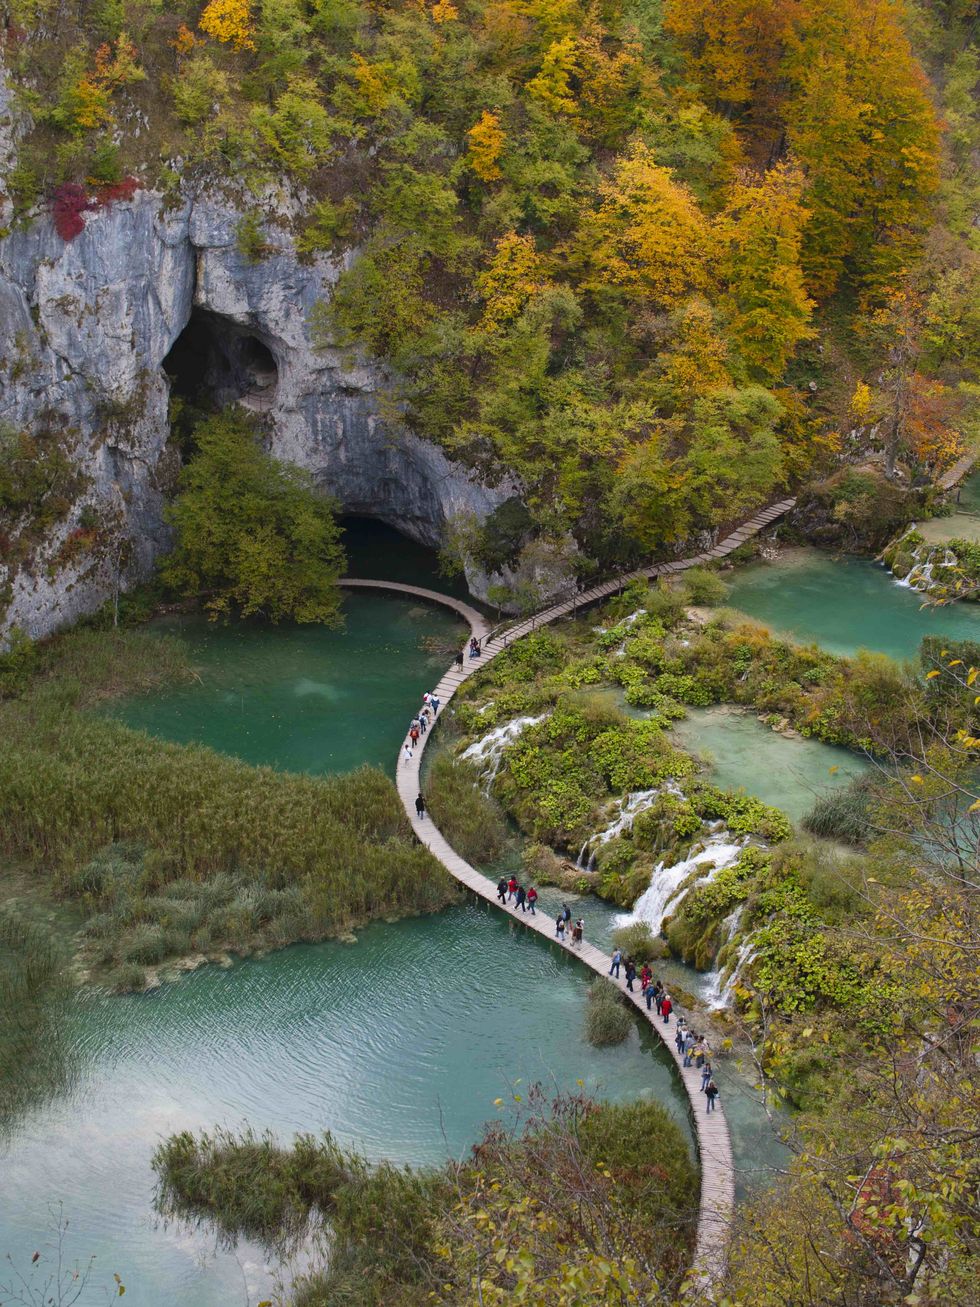 tourists walk on the main boardwalk in the centre of plitvice lakes national park during autumn the park was the first natural site to be included on unesco's world heritage list